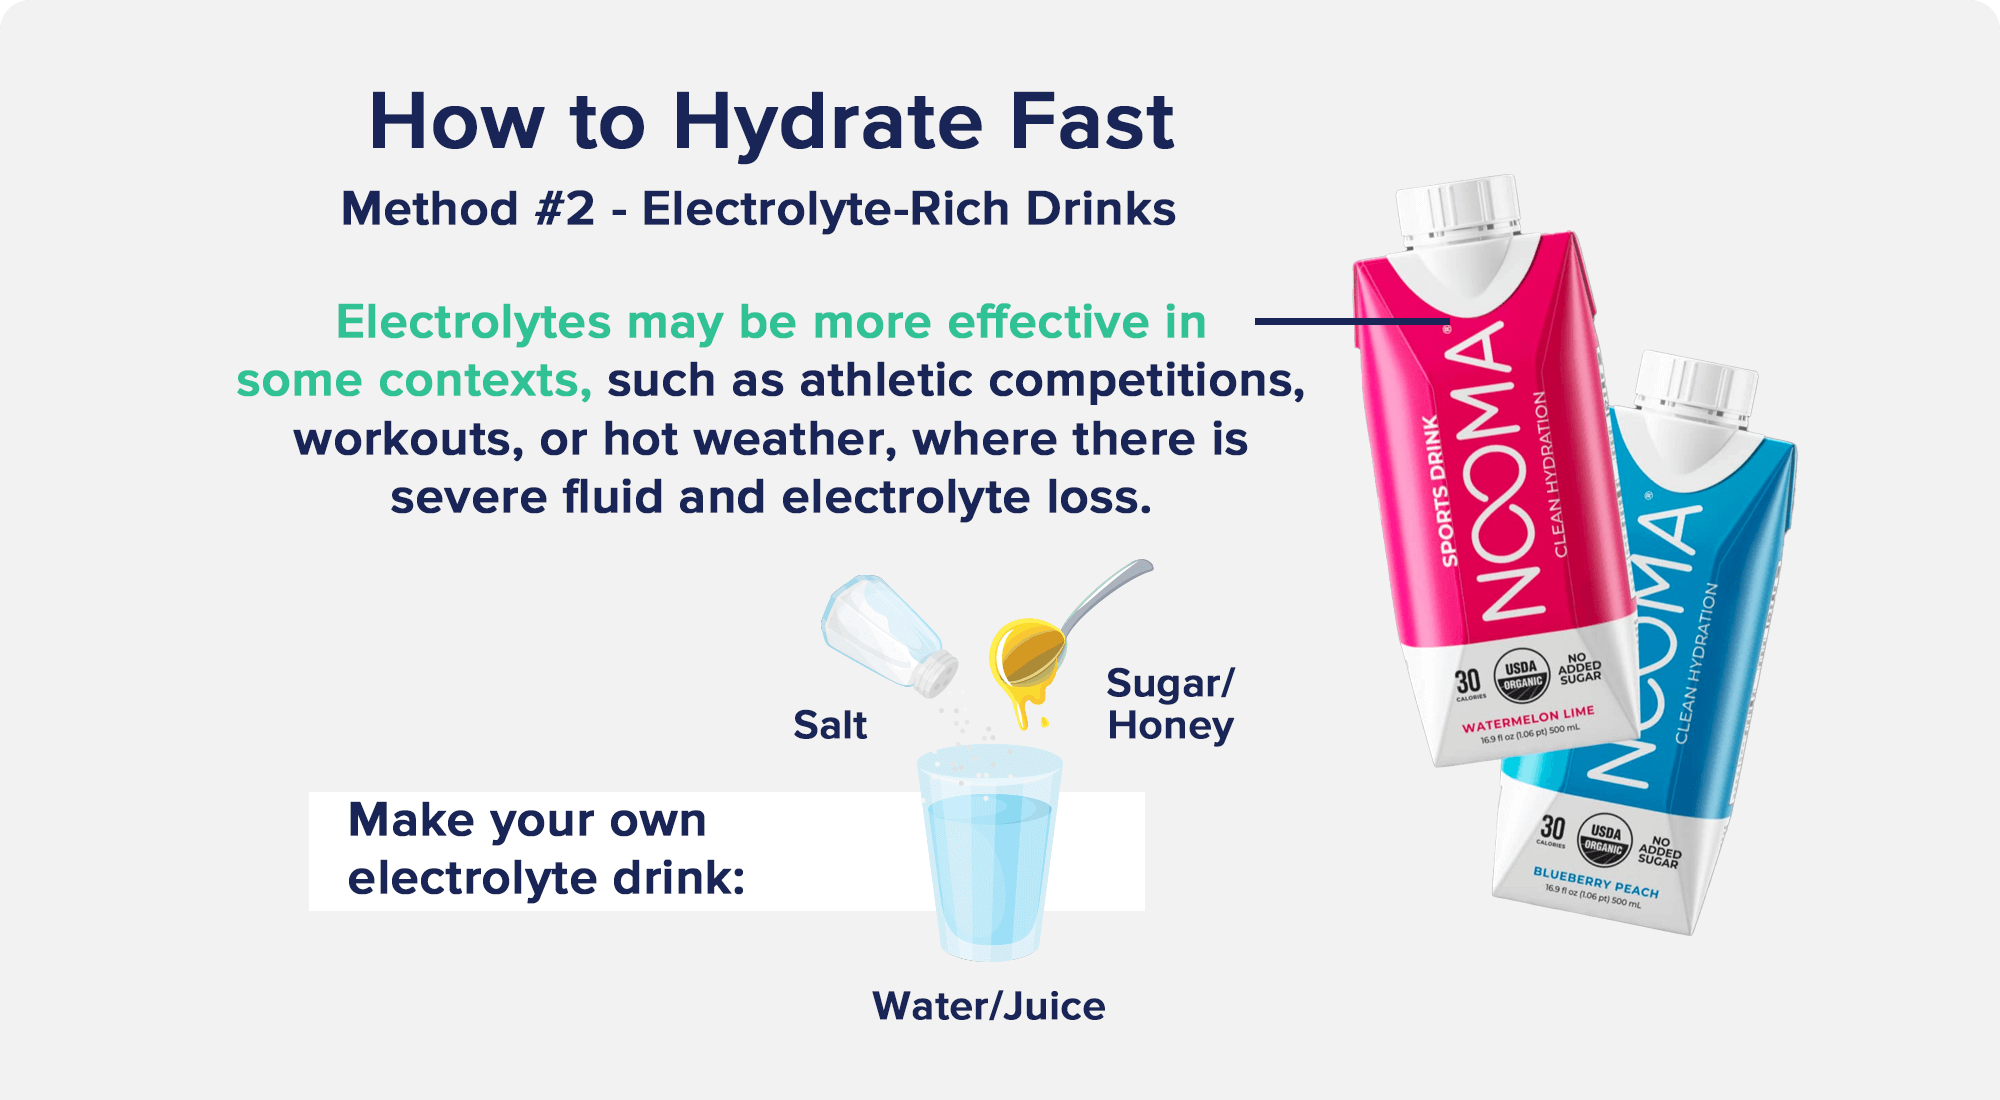 How to Hydrate Fast - Method #2